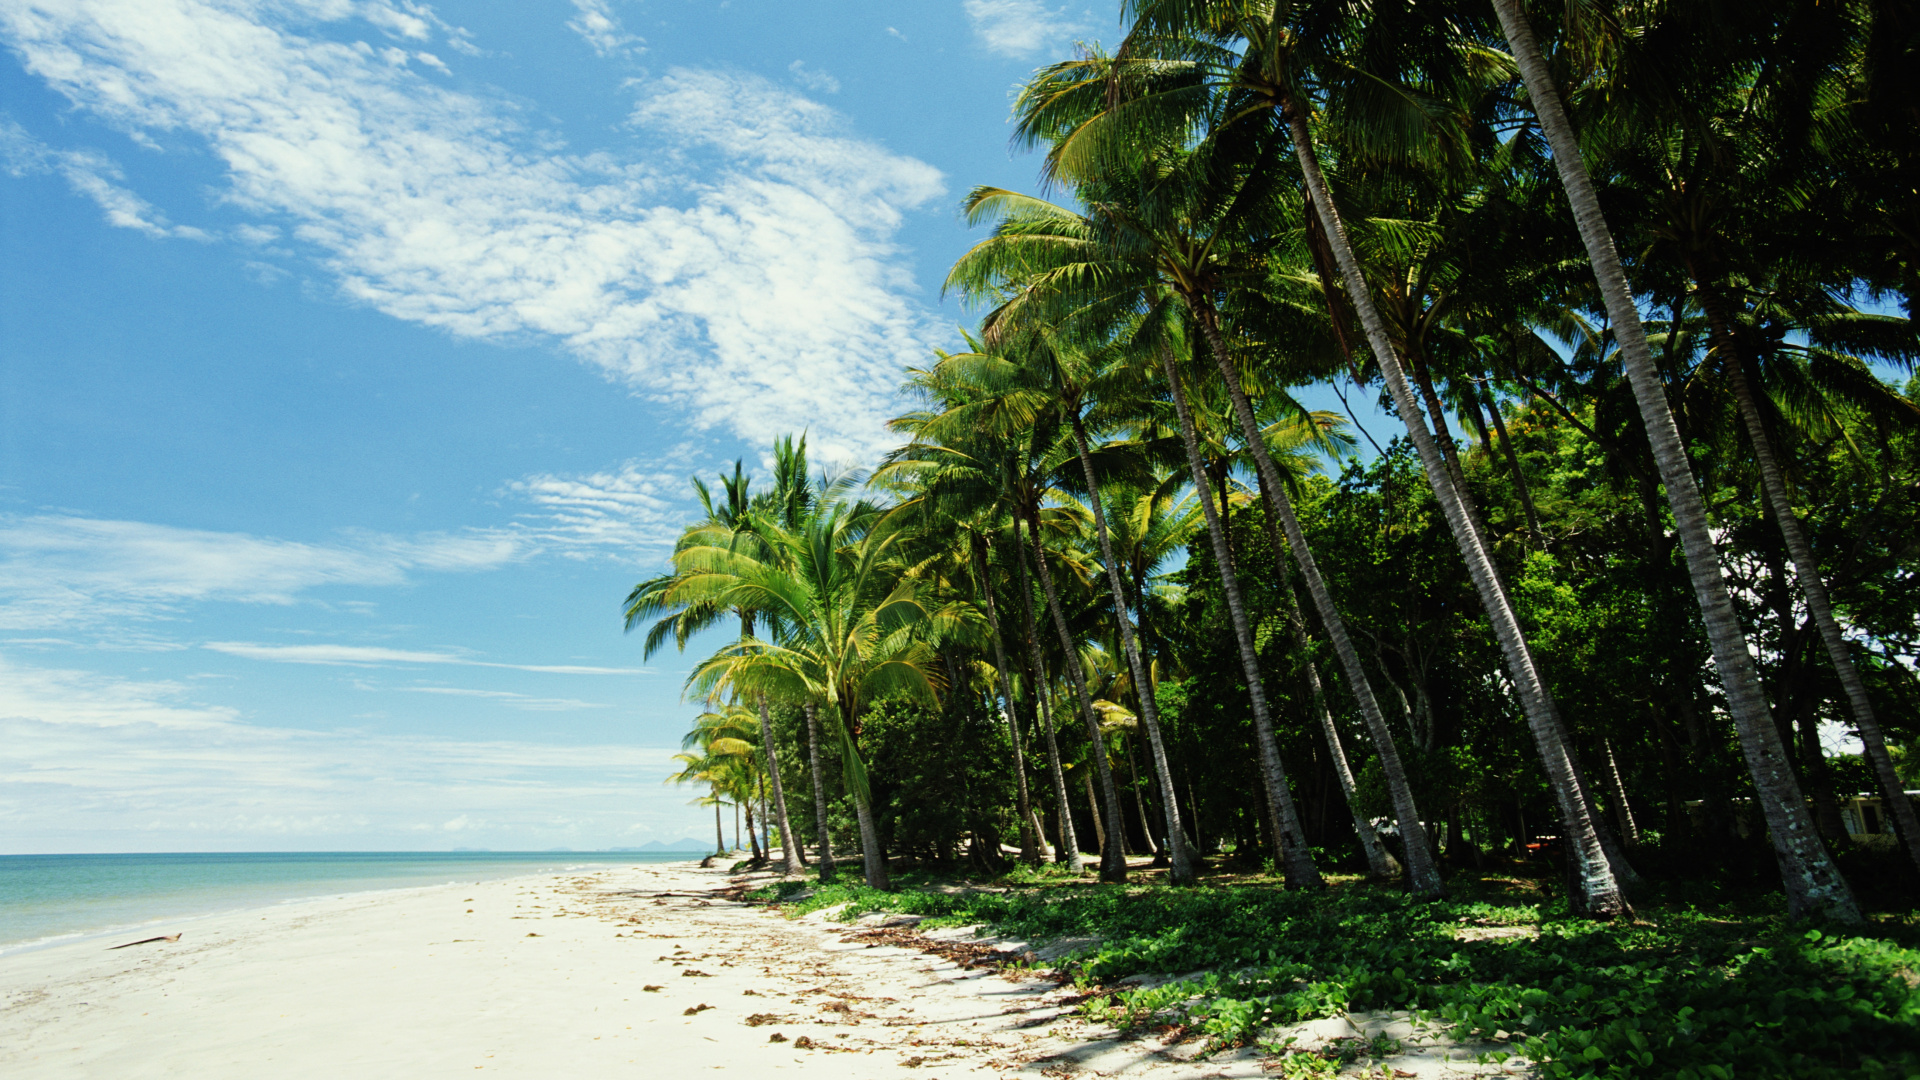 Green Palm Trees on White Sand Beach During Daytime. Wallpaper in 1920x1080 Resolution